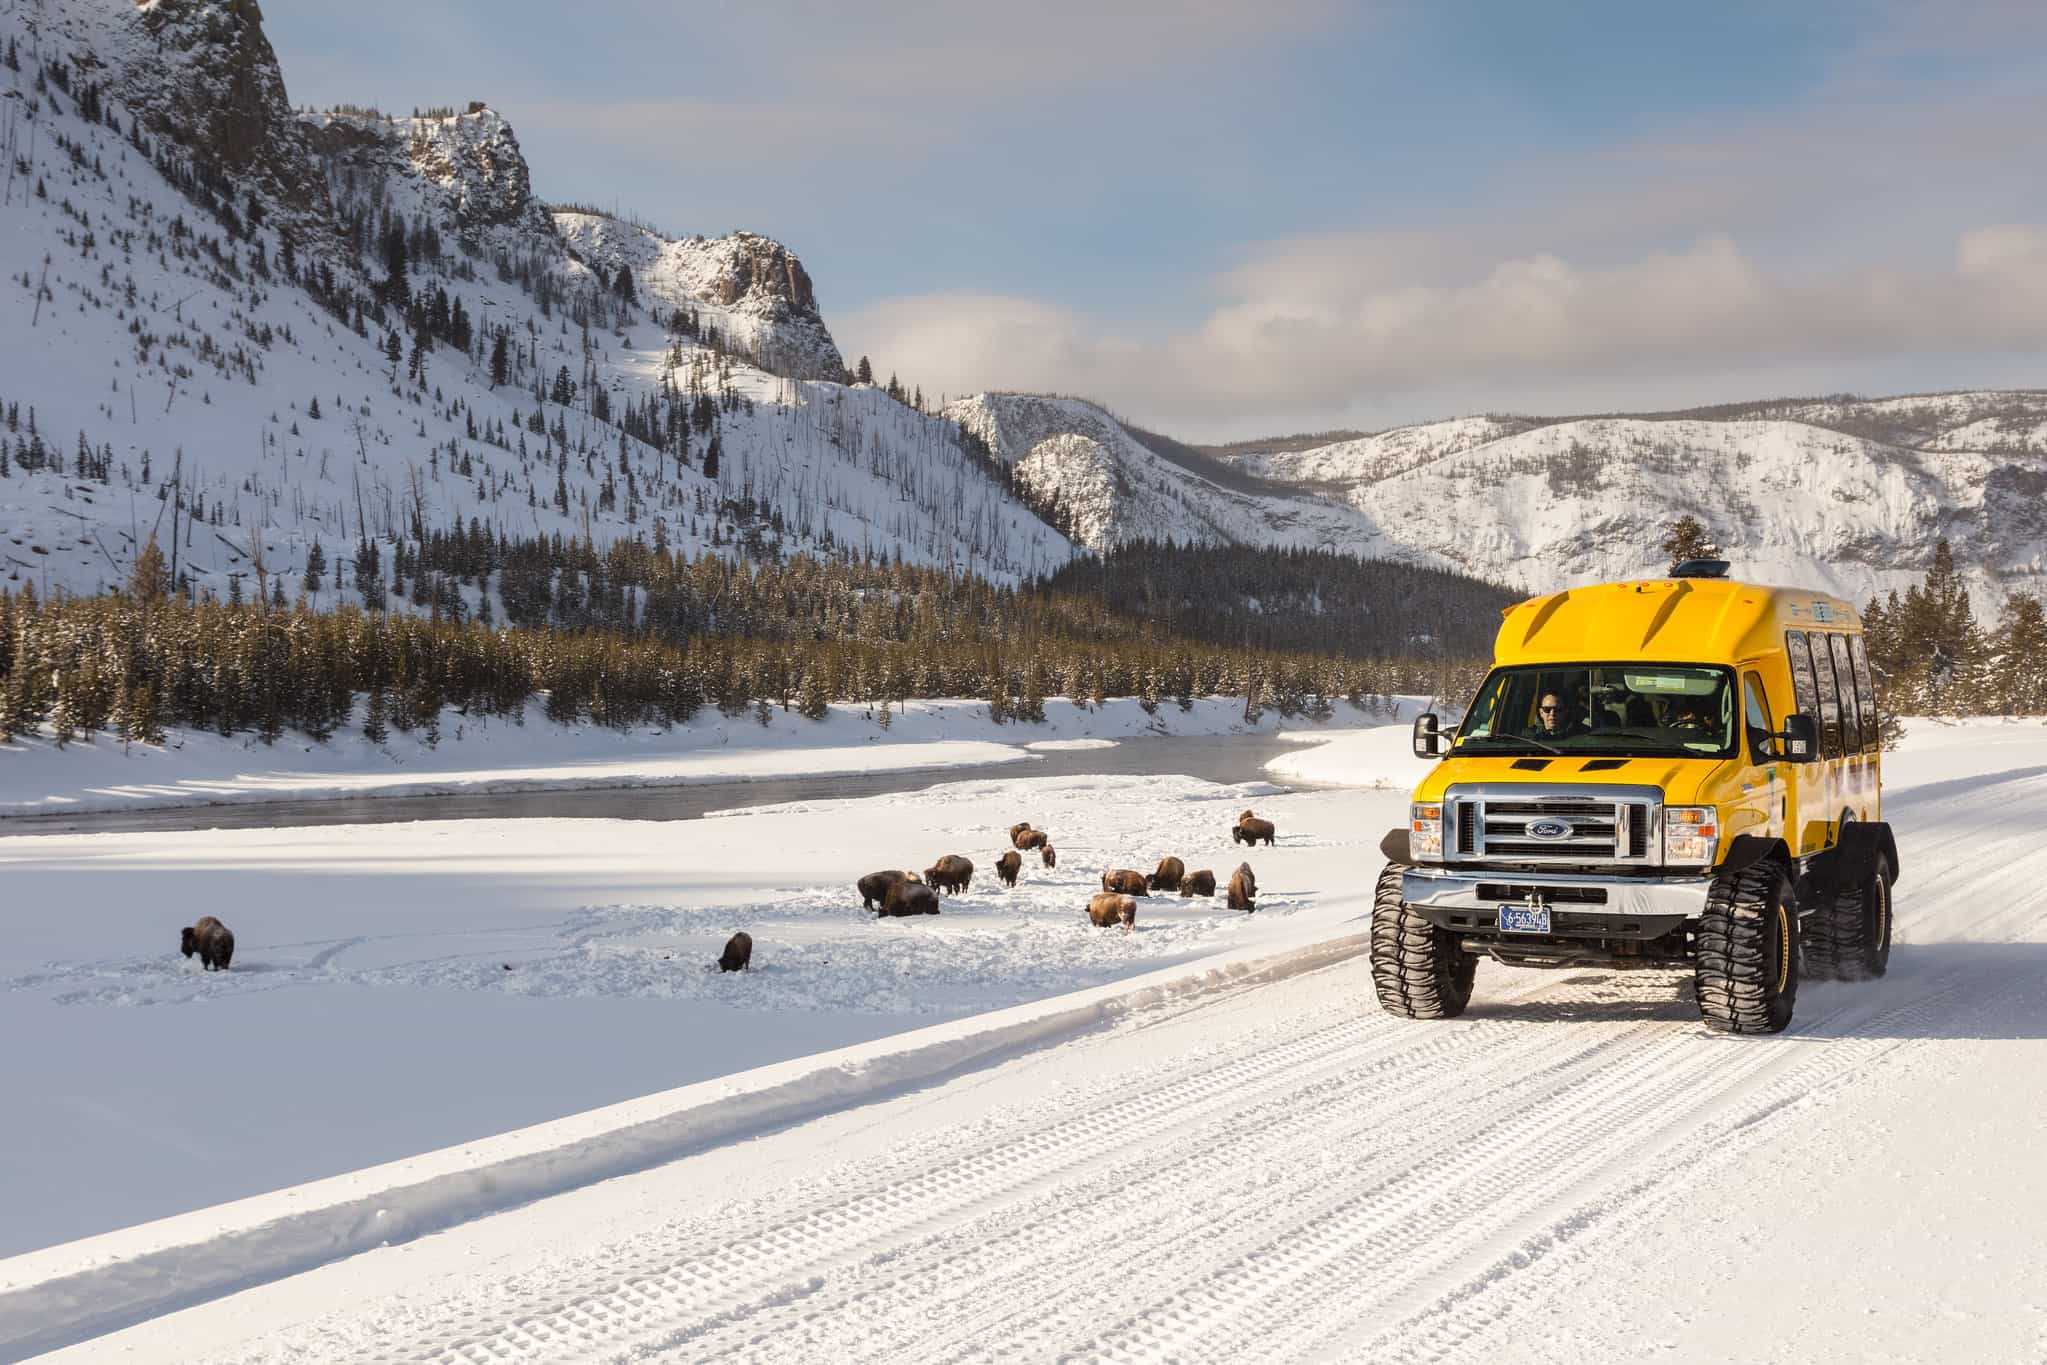 Snowcoach along the Madison River with bison, yellowstone in winter